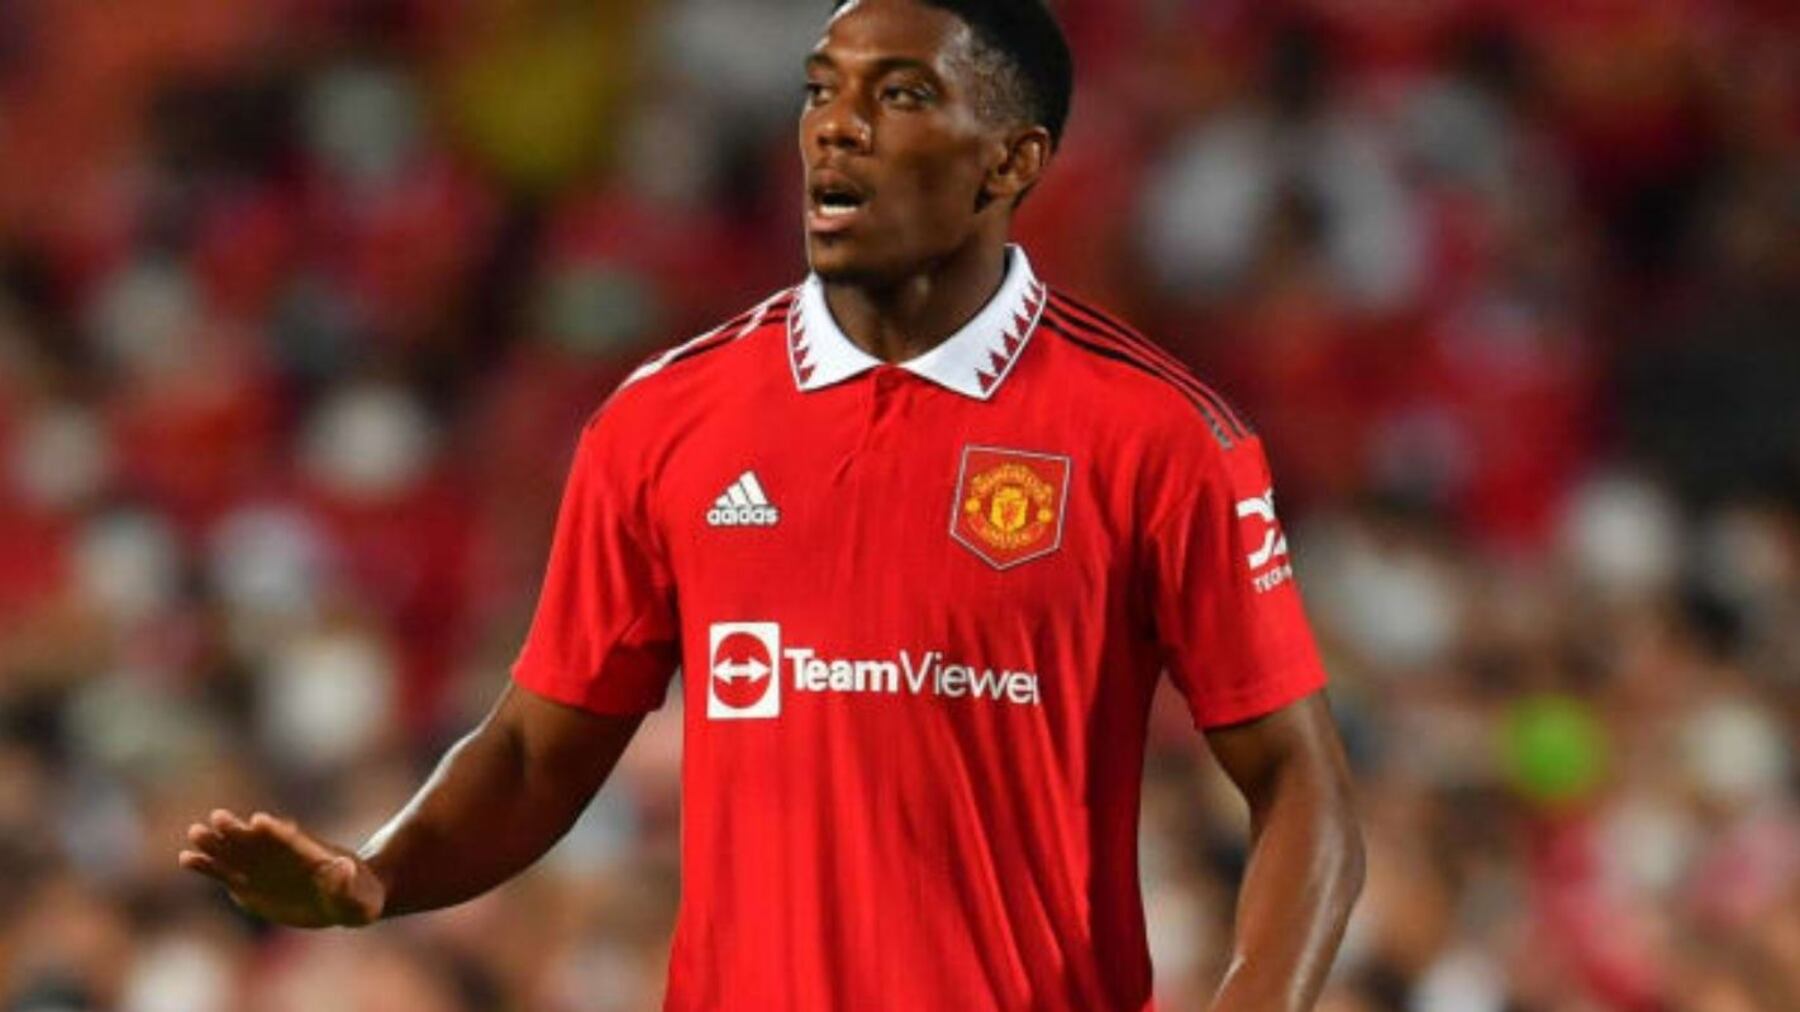 Another exit? Man Utd striker might go to La Liga after the World Cup